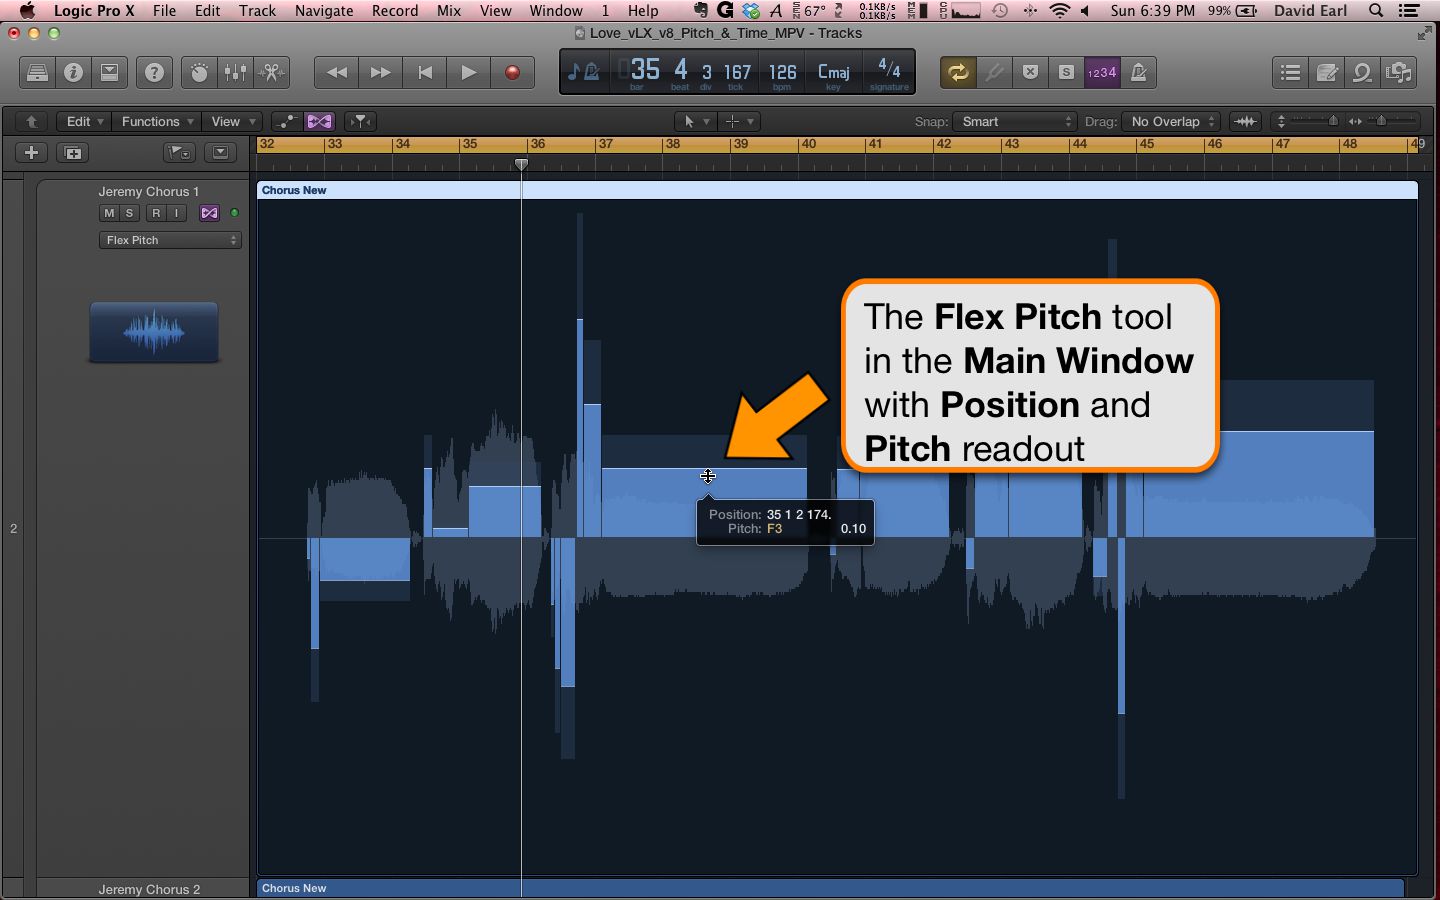 The Flex Pitch Tool displays a useful position and pitch readout.